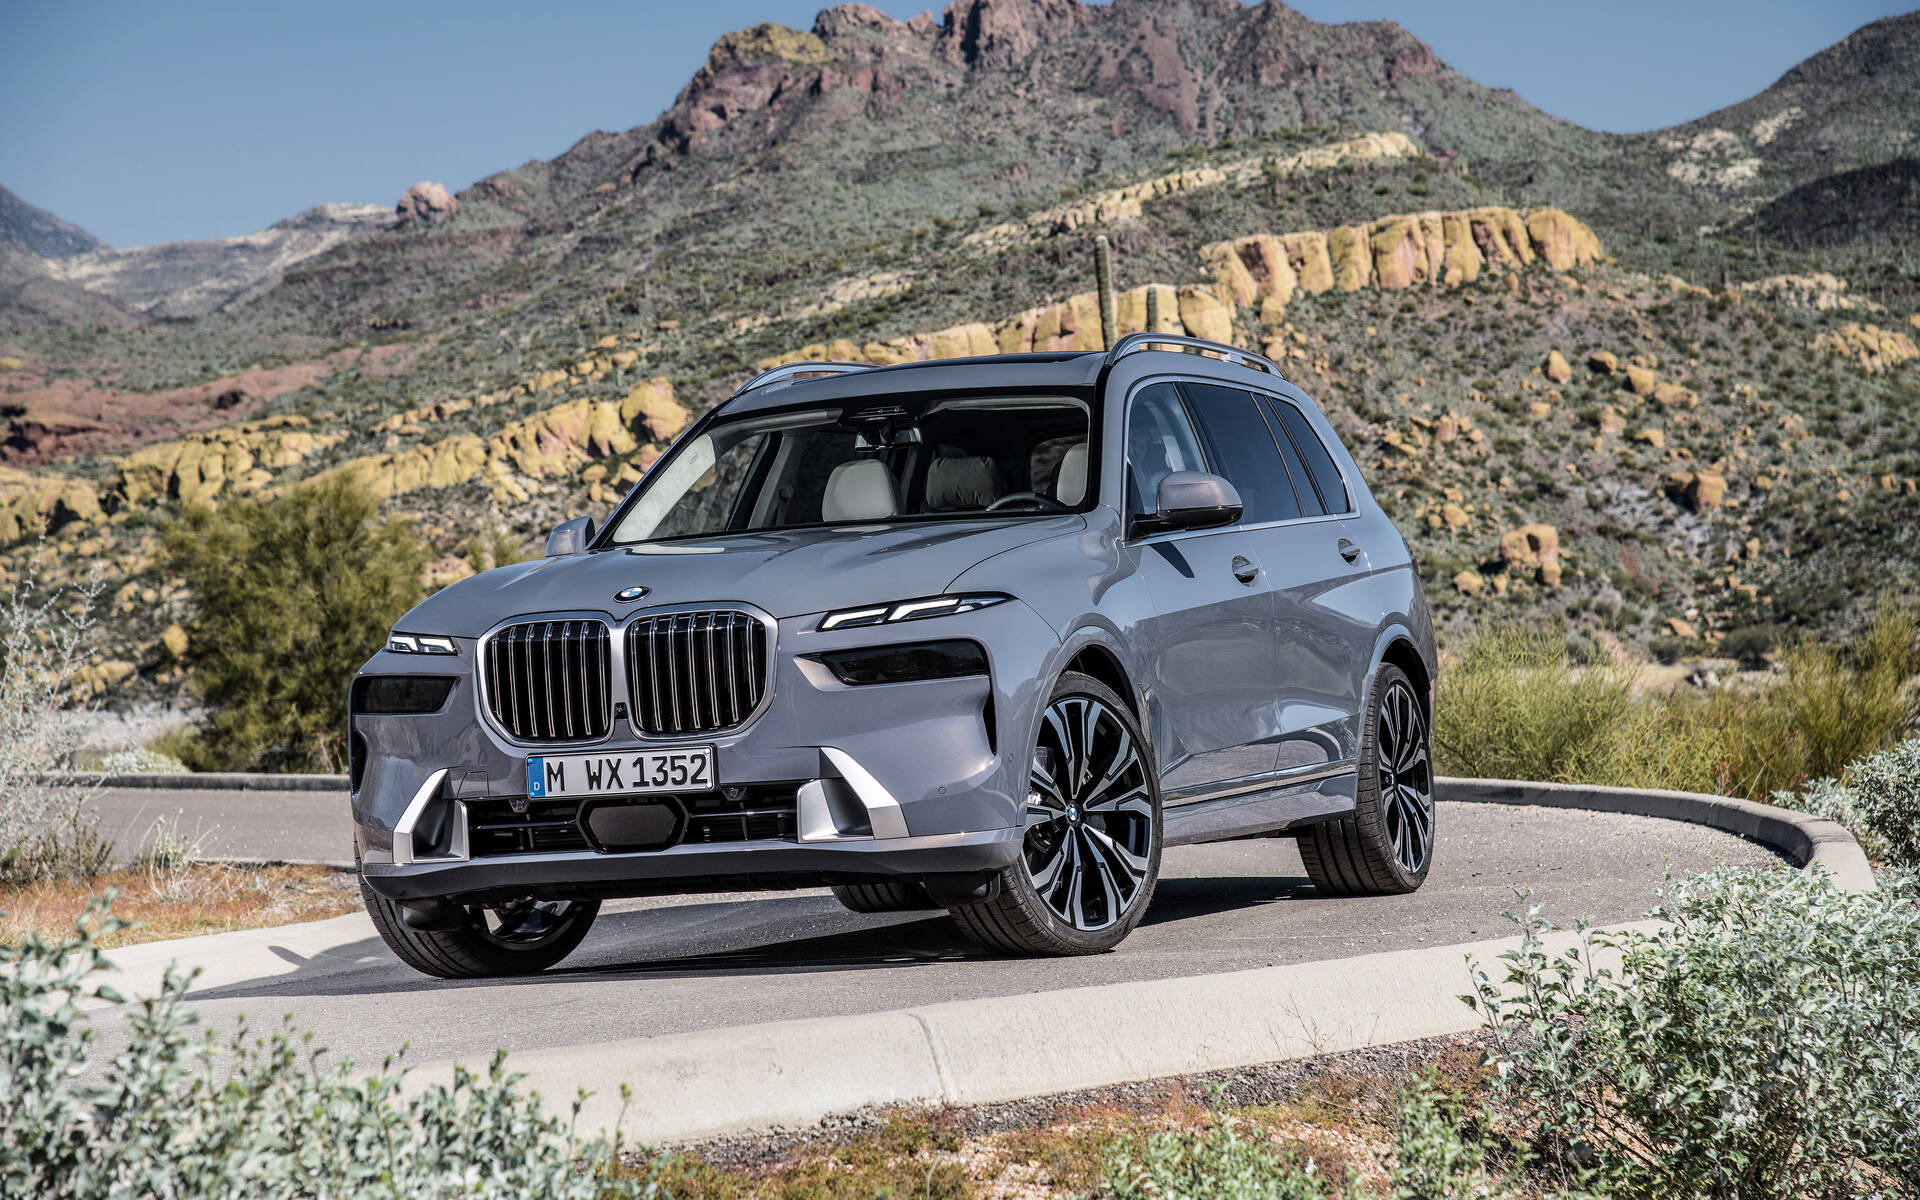 2023 BMW X7 Review, Pricing, and Specs